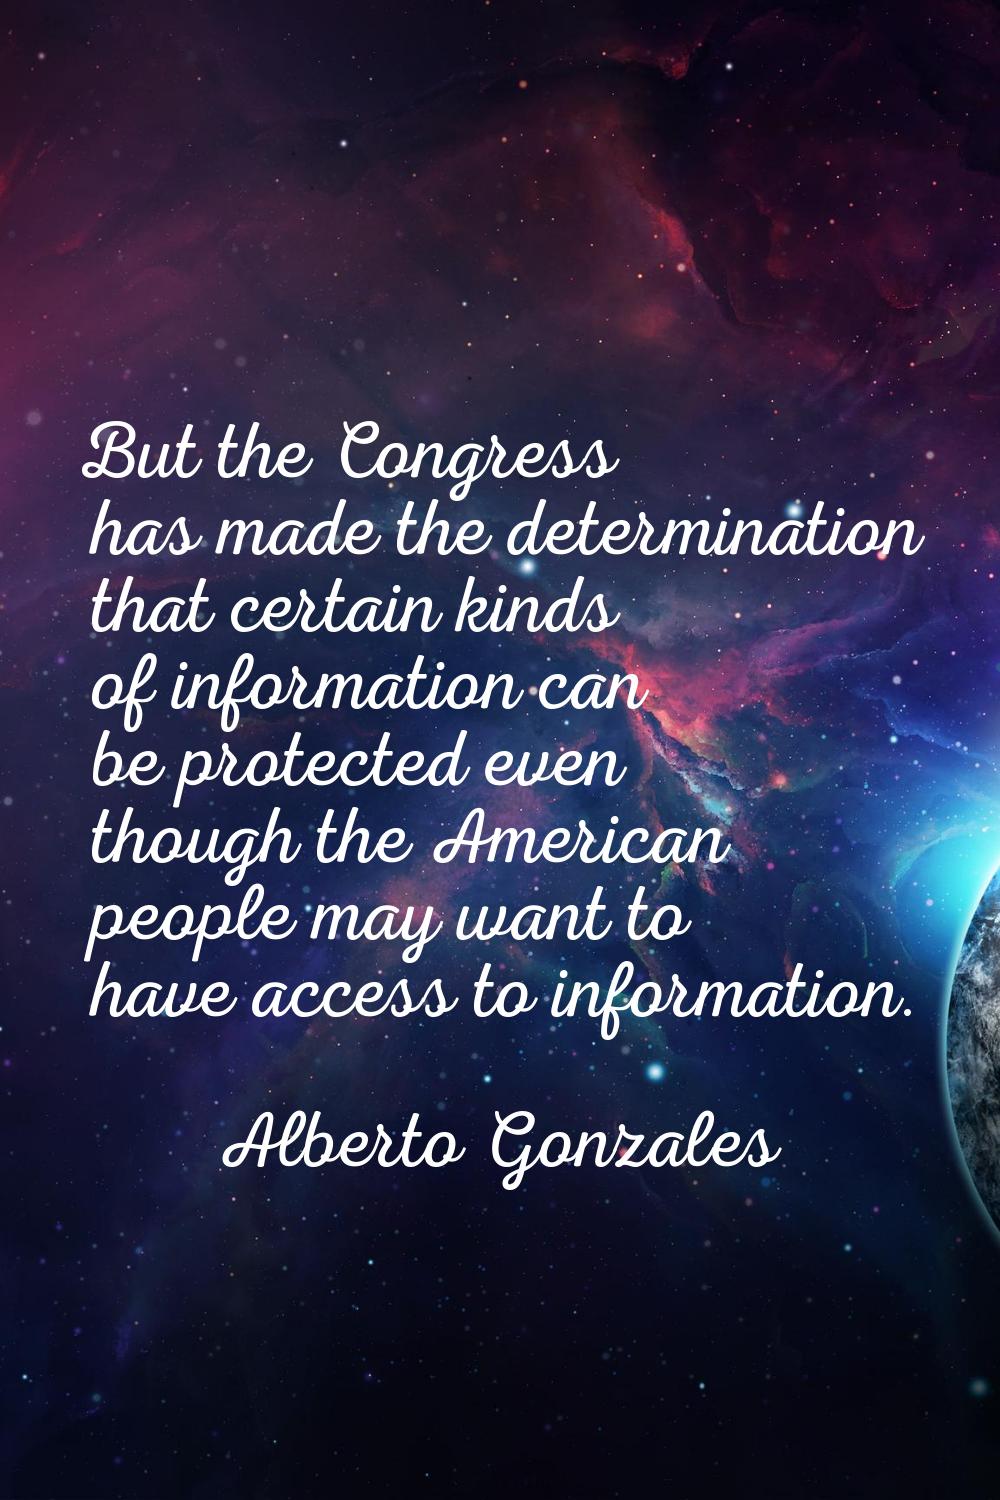 But the Congress has made the determination that certain kinds of information can be protected even